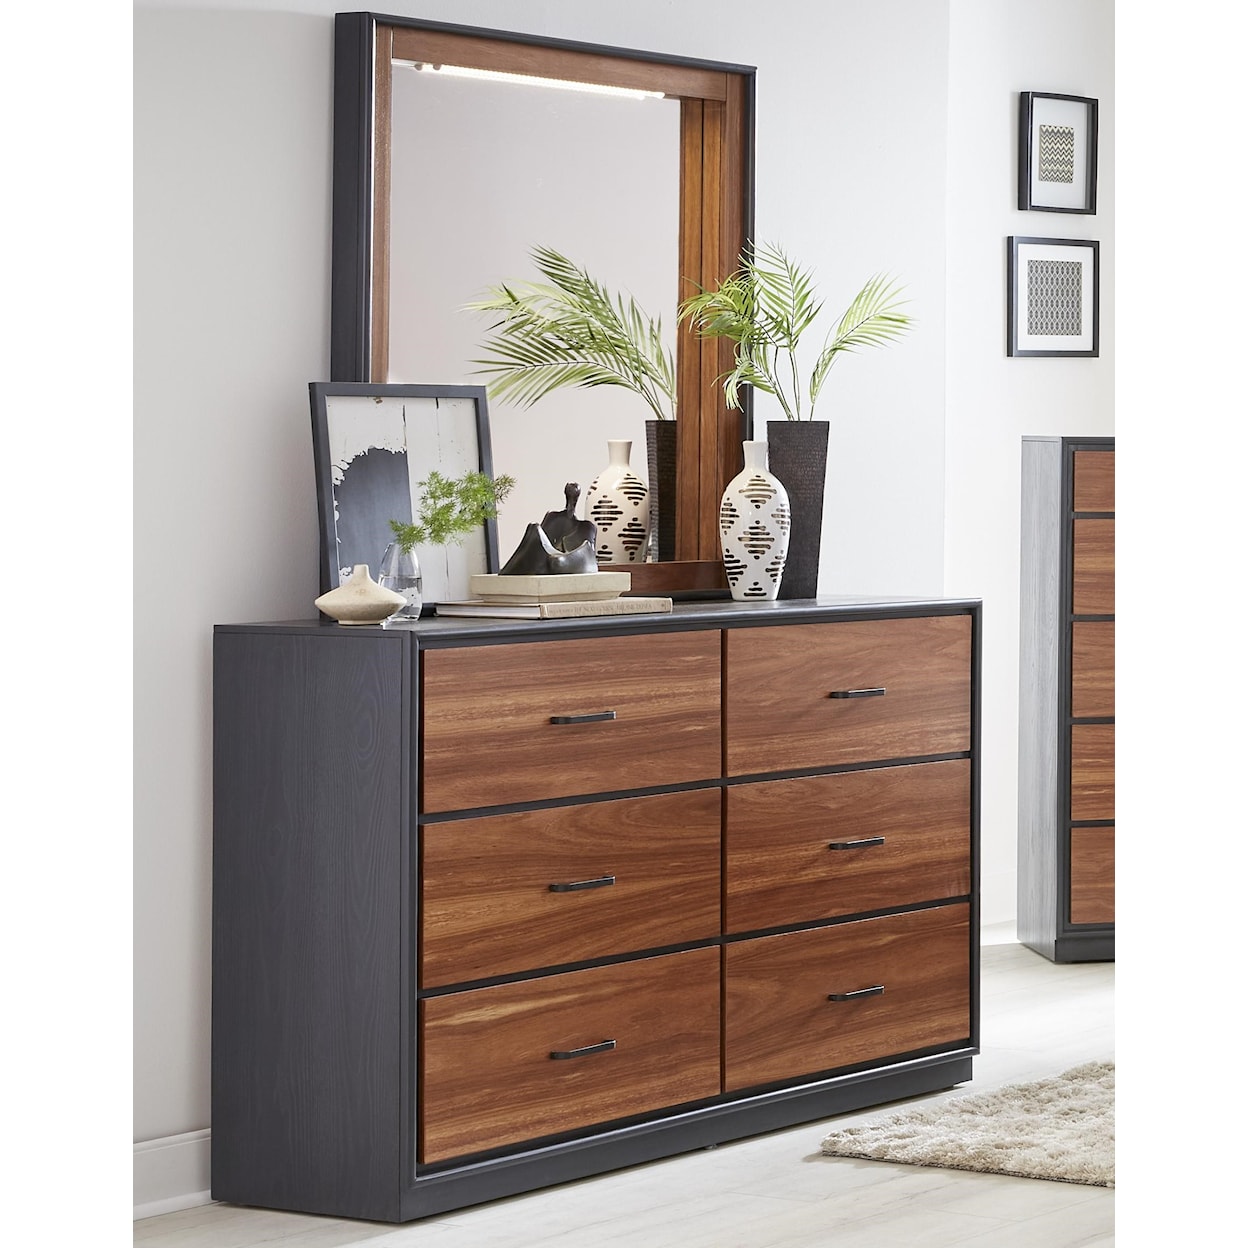 Lifestyle Madison Dresser and Mirror with LED Lights